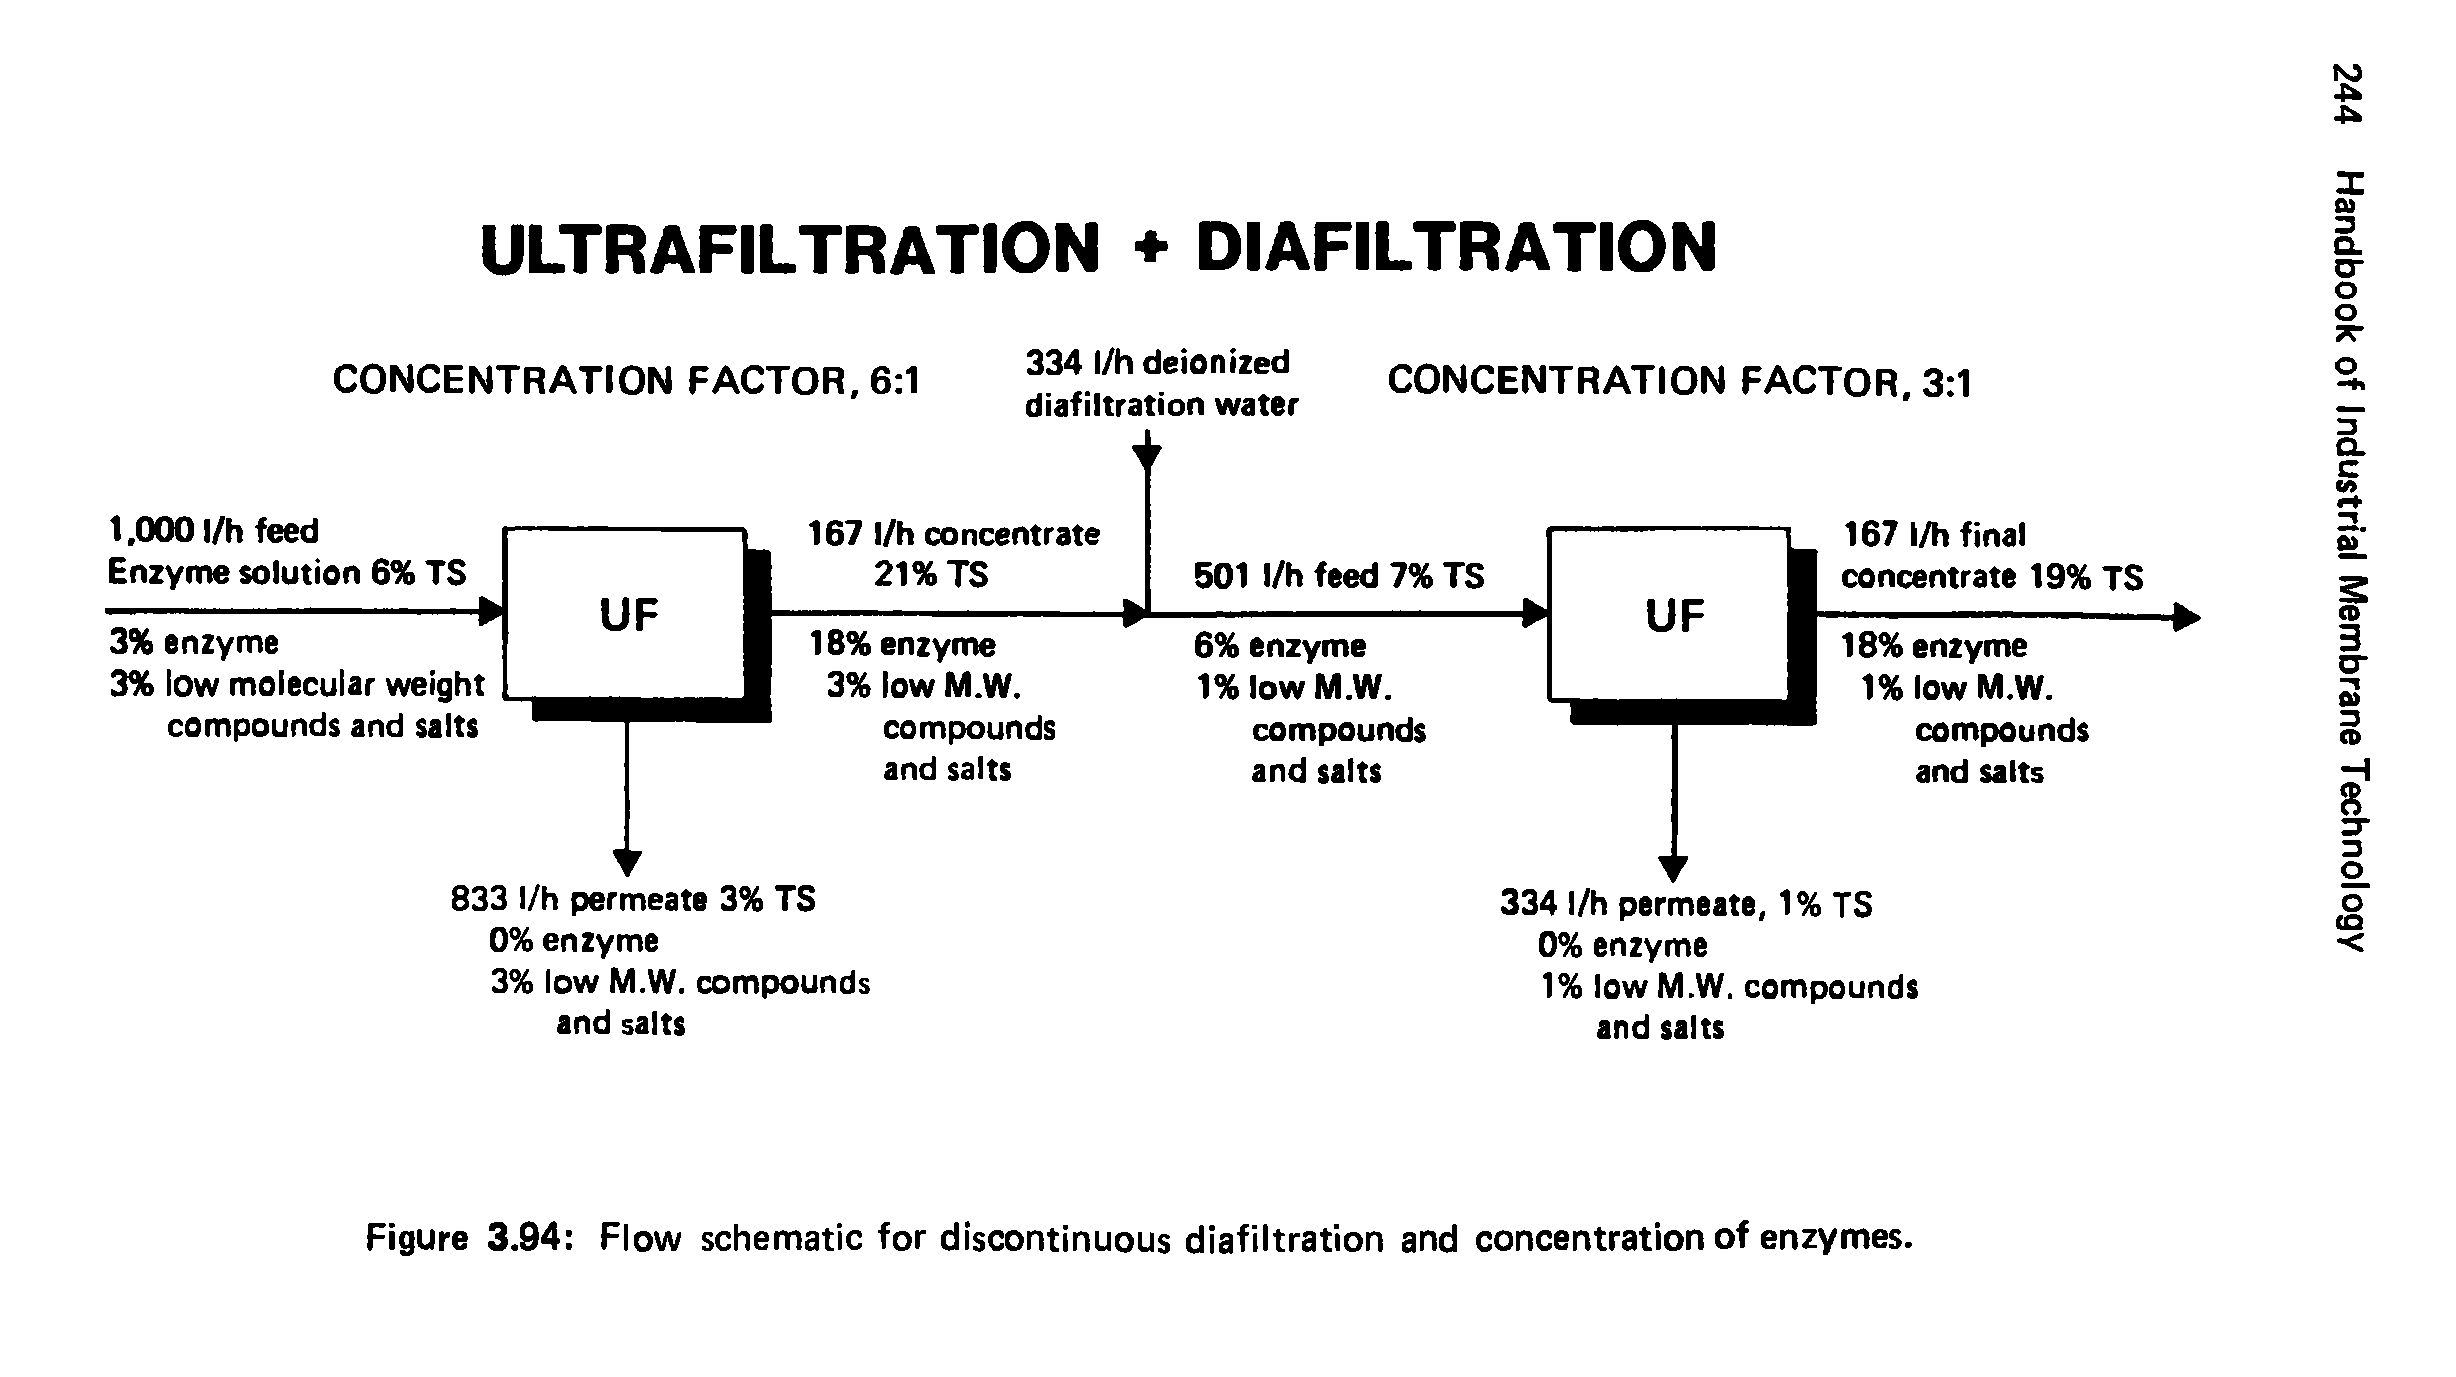 Figure 3.94 Flow schematic for discontinuous diafiltration and concentration of enzymes.